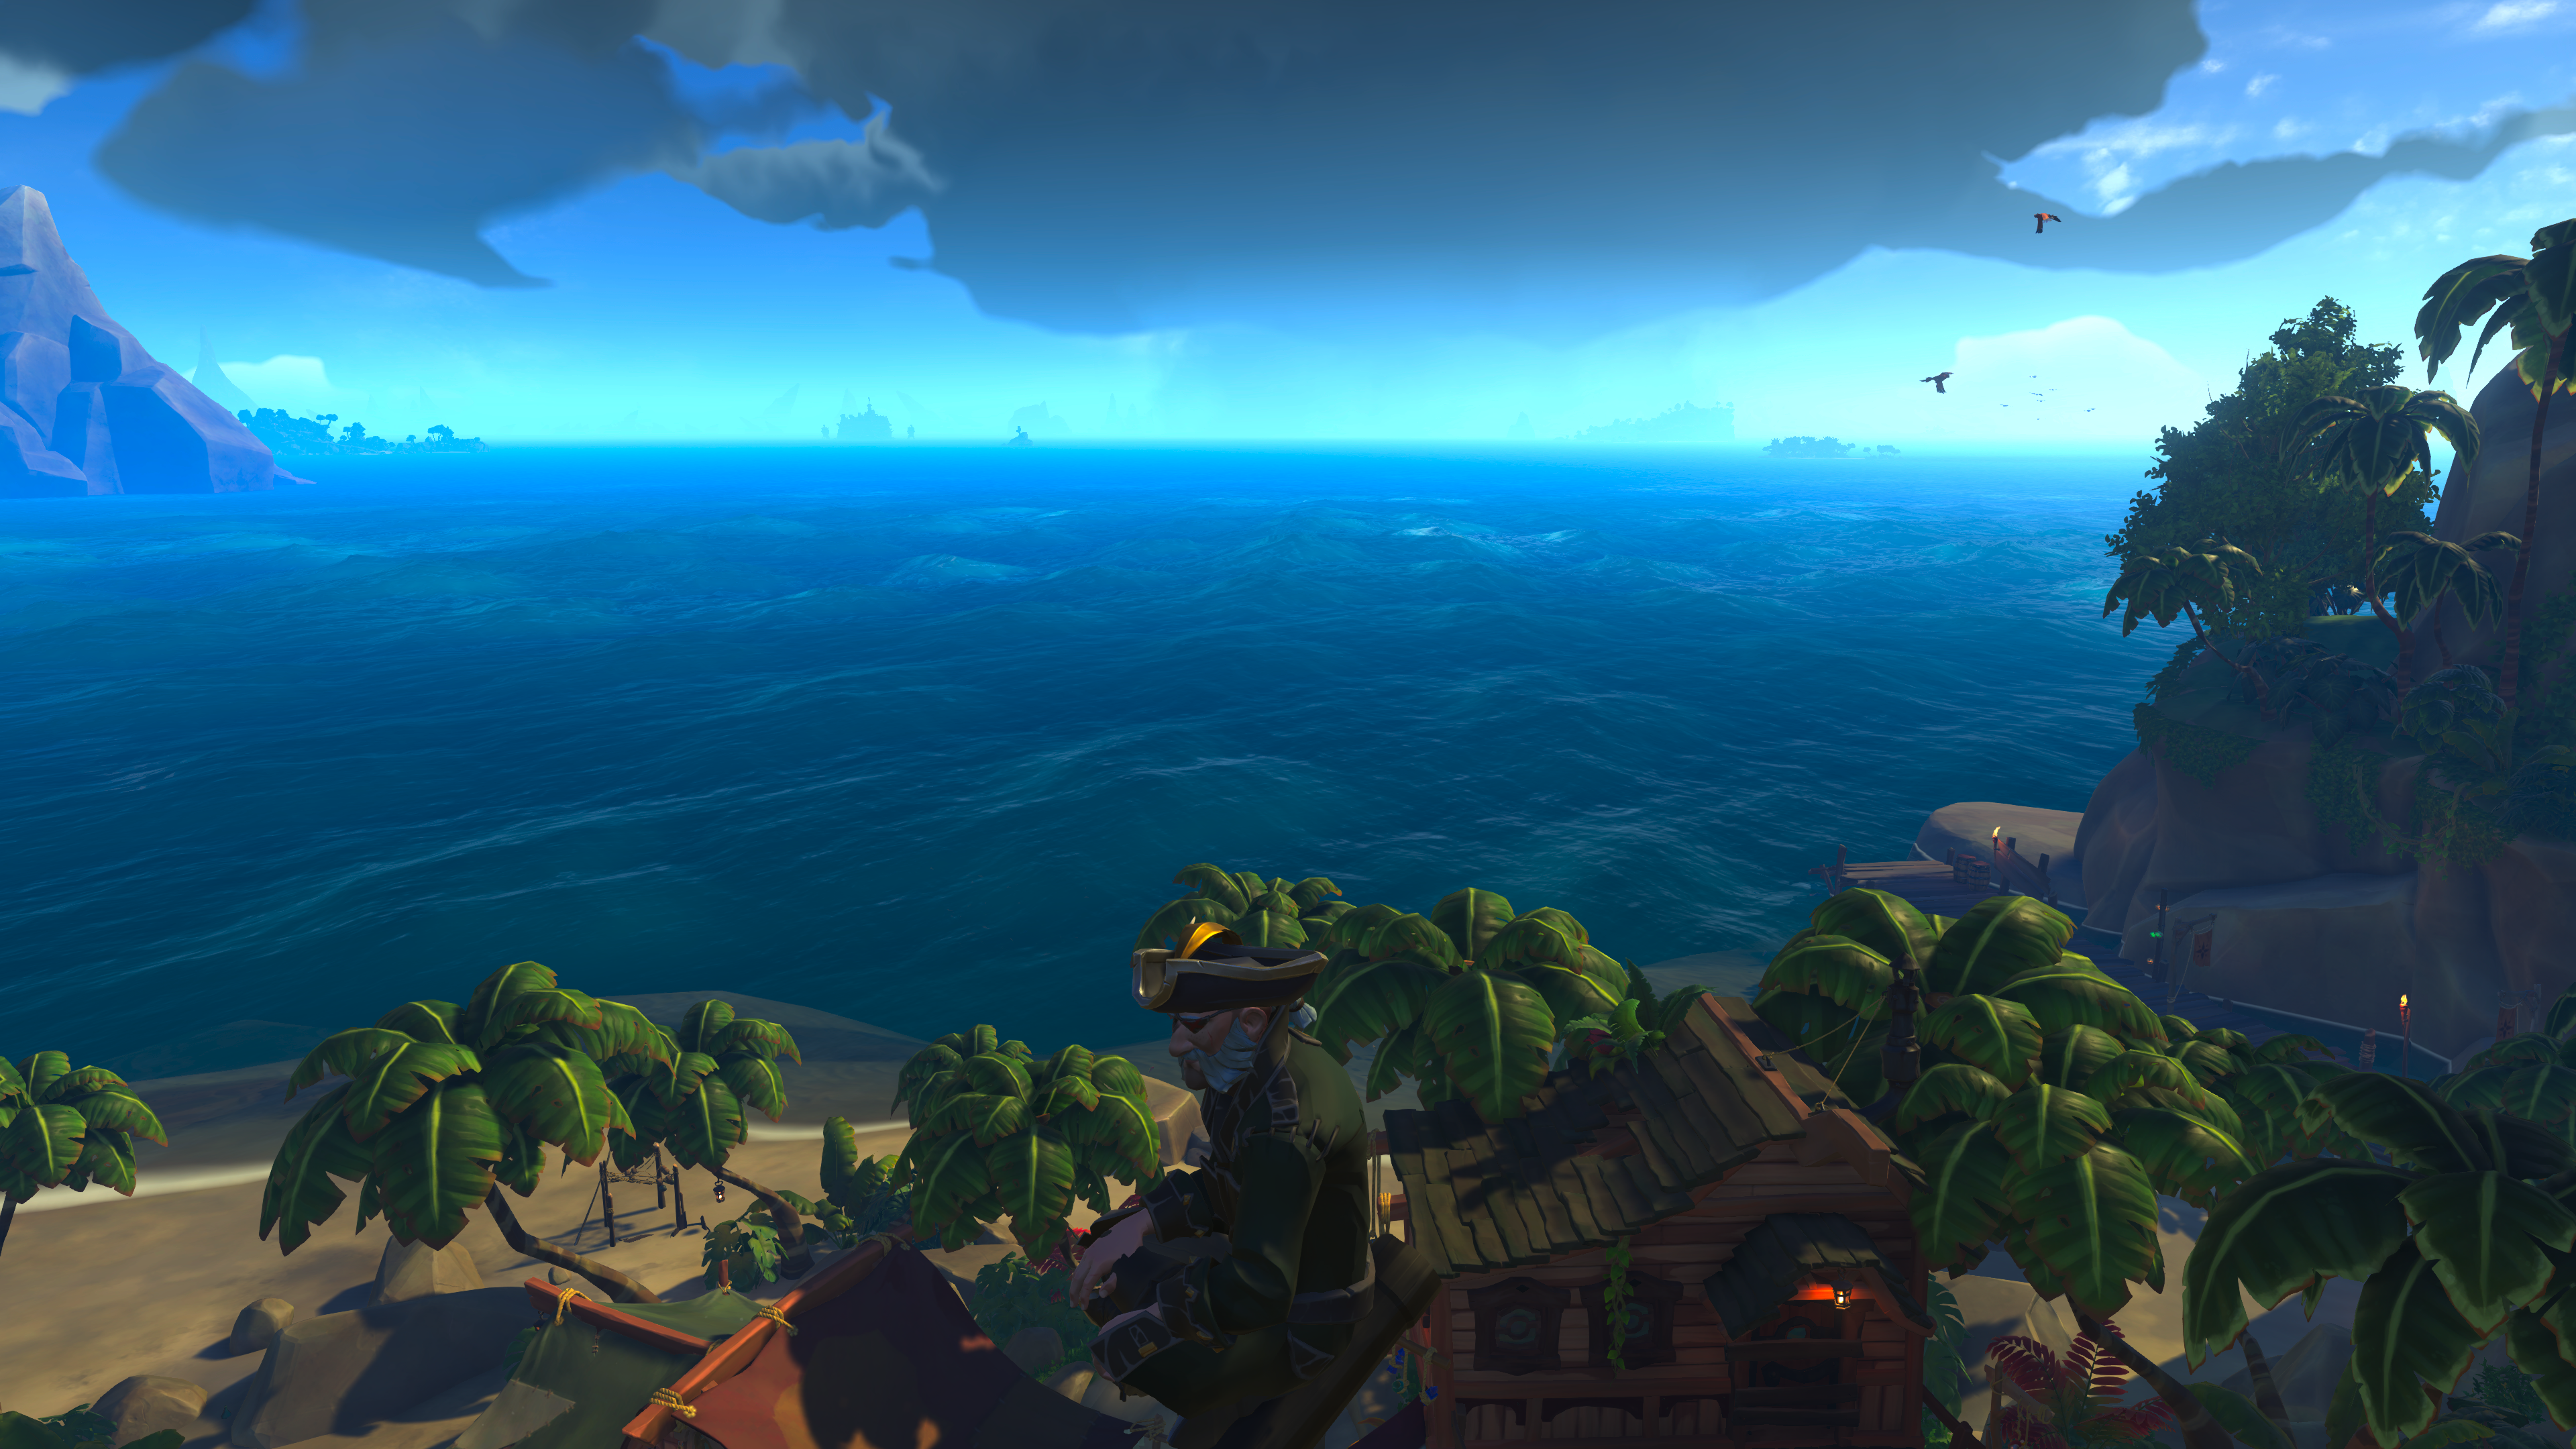 Screenshot from Sea of Thieves showing a pirate resting and taking in the view over the stunning sea.